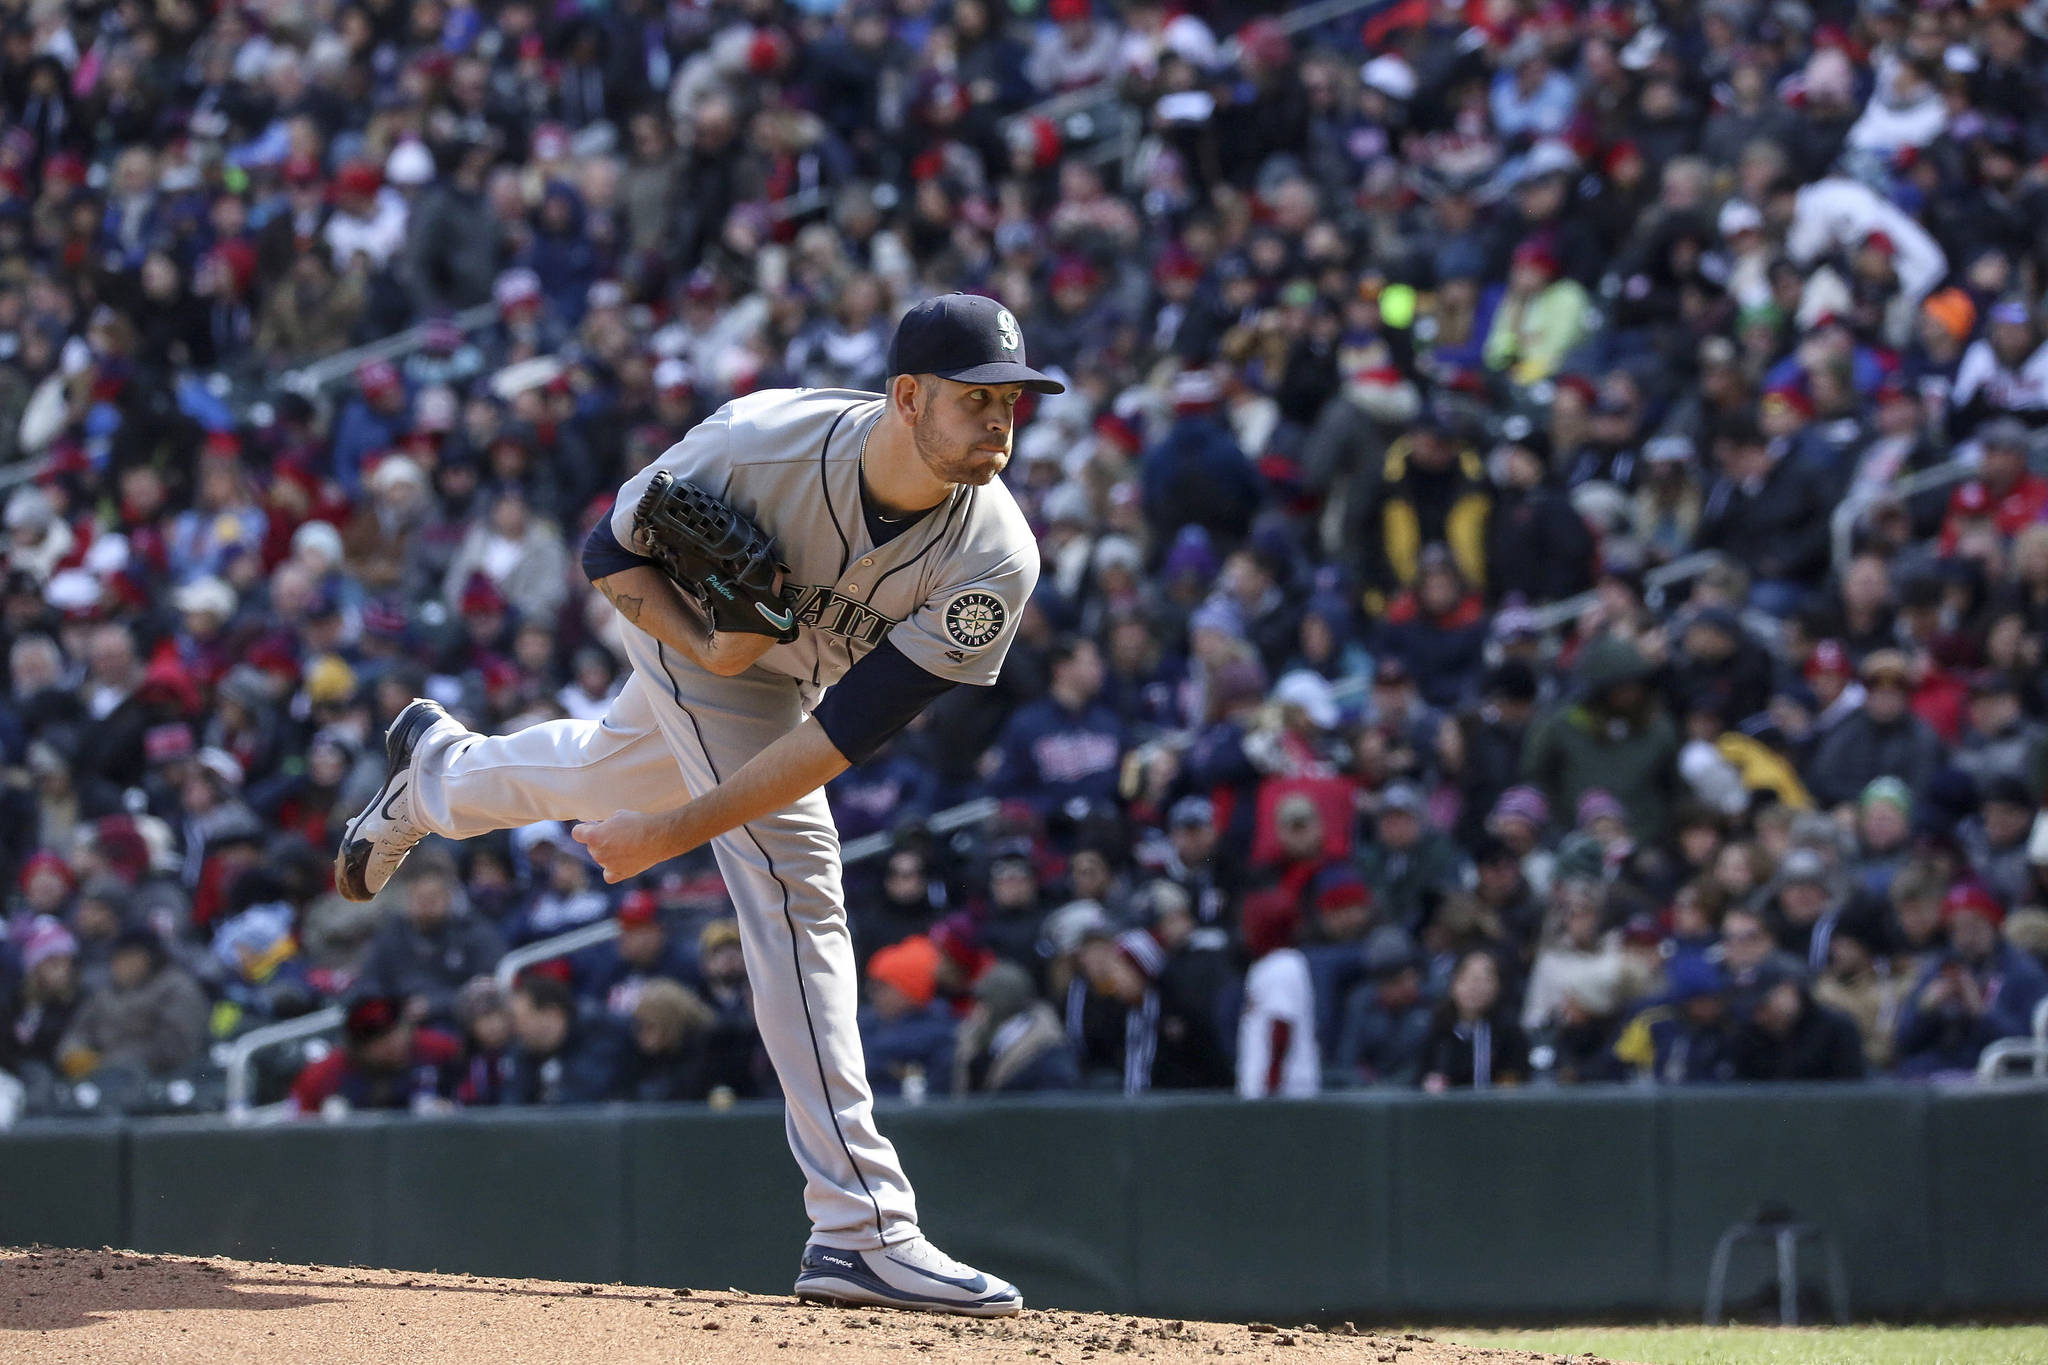 James Paxton has led the way for the Mariners. Photo by Andy Witchger/Flickr